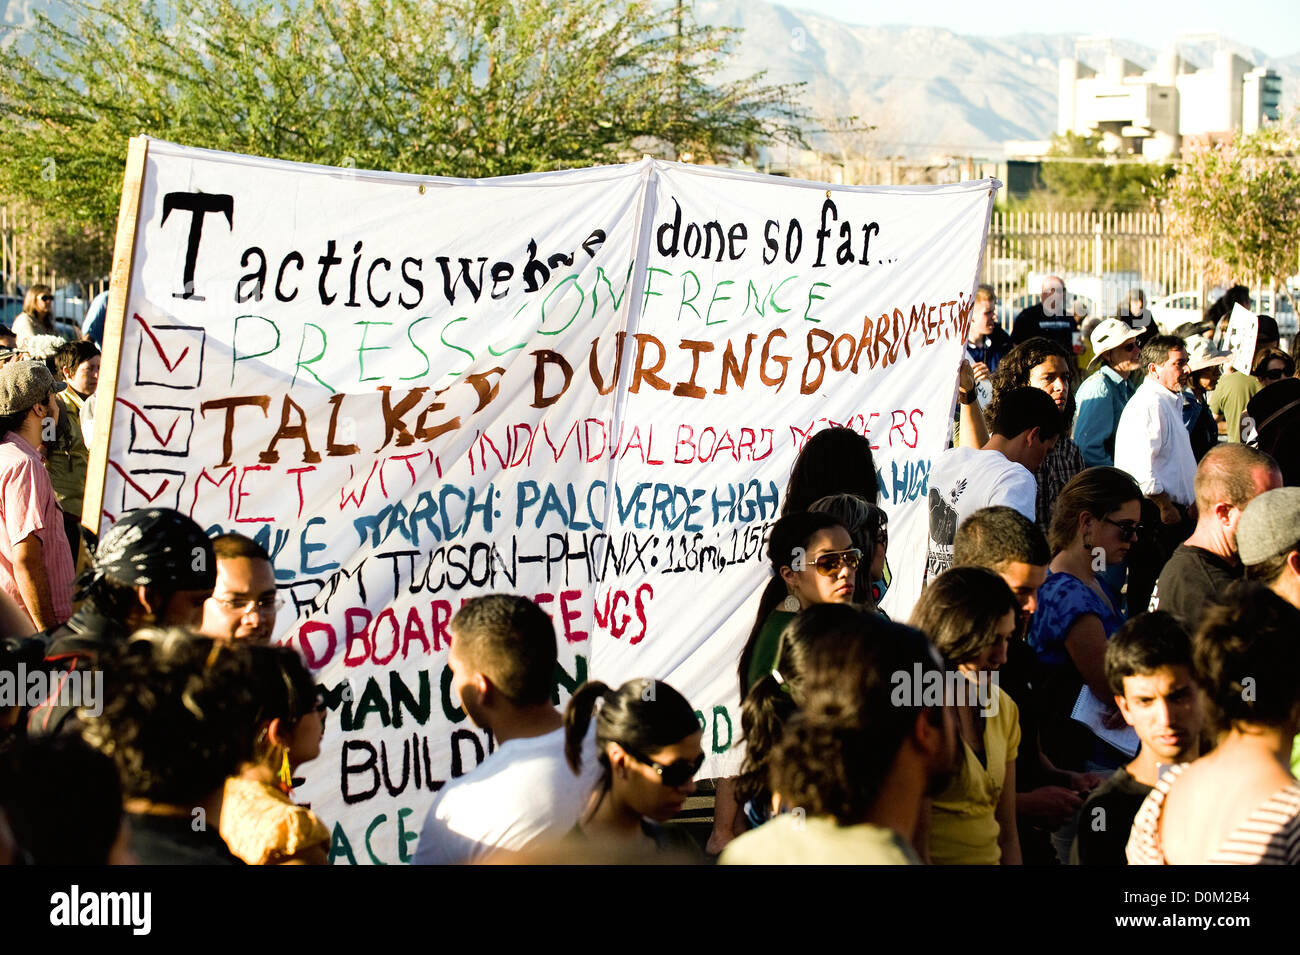 May 3, 2011 - Tucson, Arizona, U.S - About 300 protestors and 90 TPD officers, many in riot gear, gathered outside a Tucson Unified School District board meeting in Tucson, Ariz. about the fate of the Mexican-American Studies program in some of its schools on May 3, 2011.  After creating a new desegregation plan as required by the Federal government, TUSD may reinstate the MAS program that was formally canceled in Jan. 2012. (Credit Image: © Will Seberger/ZUMAPRESS.com) Stock Photo